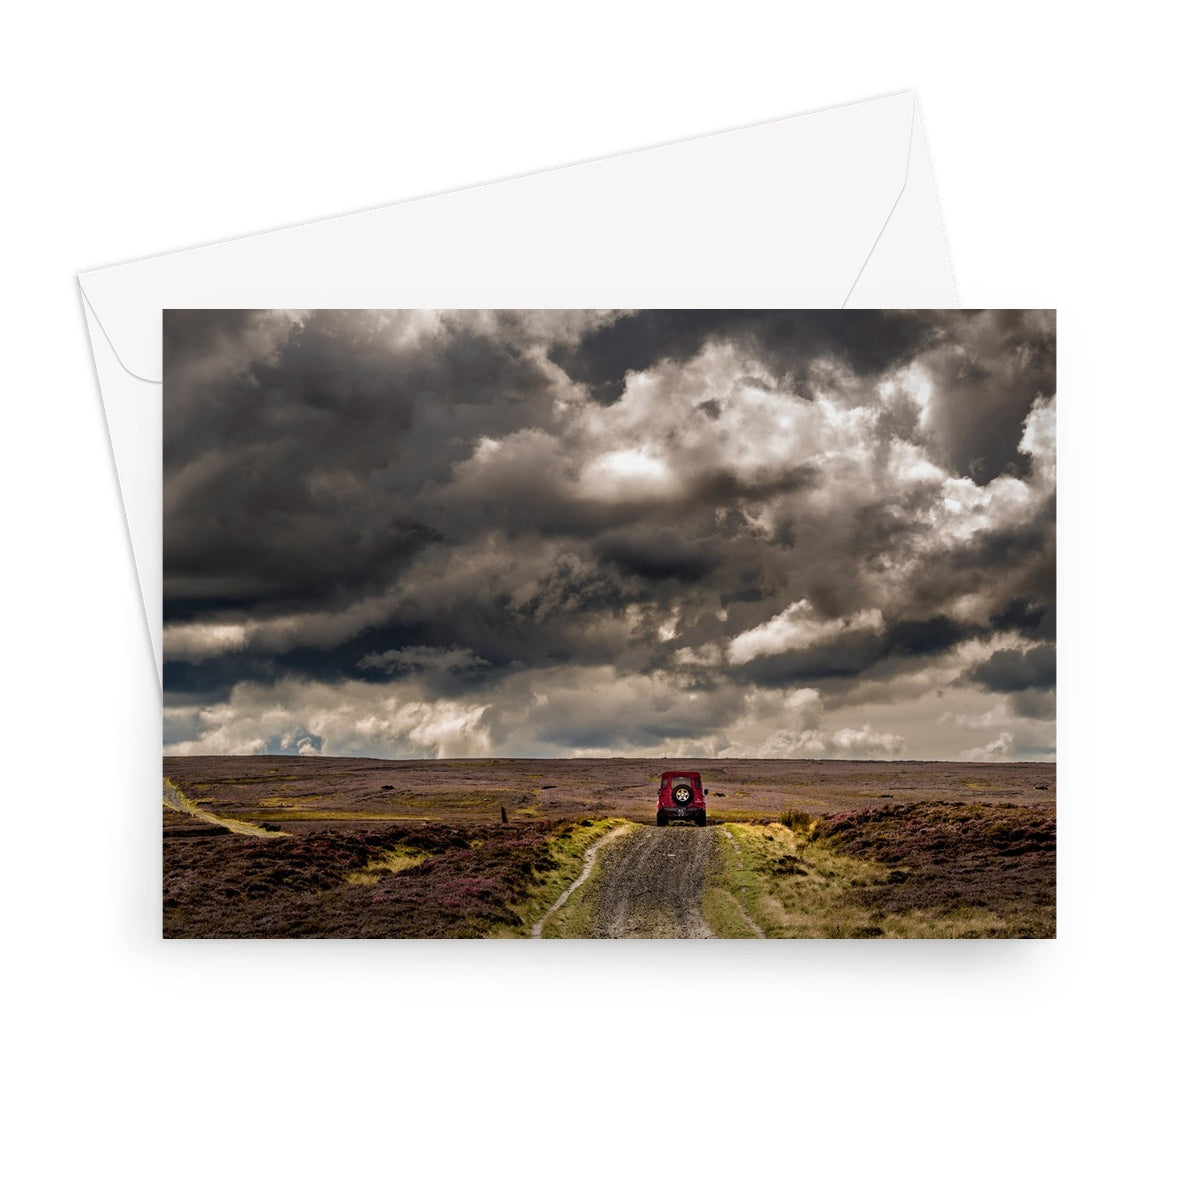 Red Land Rover Defender 110 4WD car on a Green Lane track, North Yorkshire Moors, UK. Greeting Card